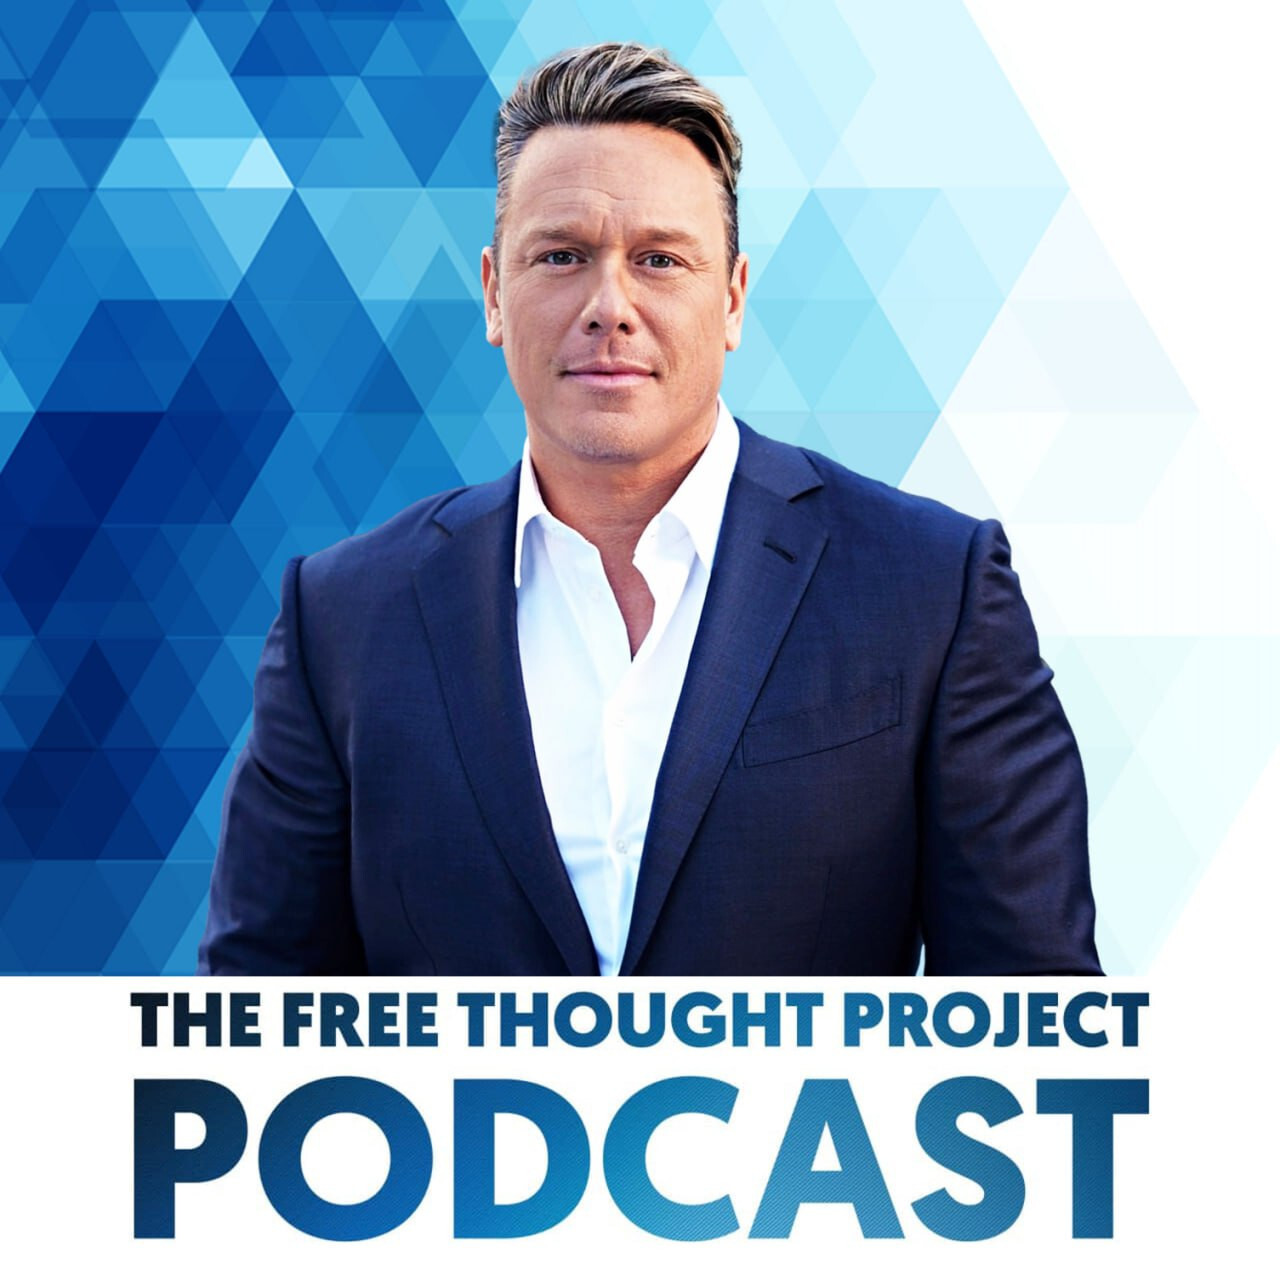 Guest: Ben Swann - The Bombshell Revelations of Jan. 6 & Ray Epps You Won’t See in the MSM